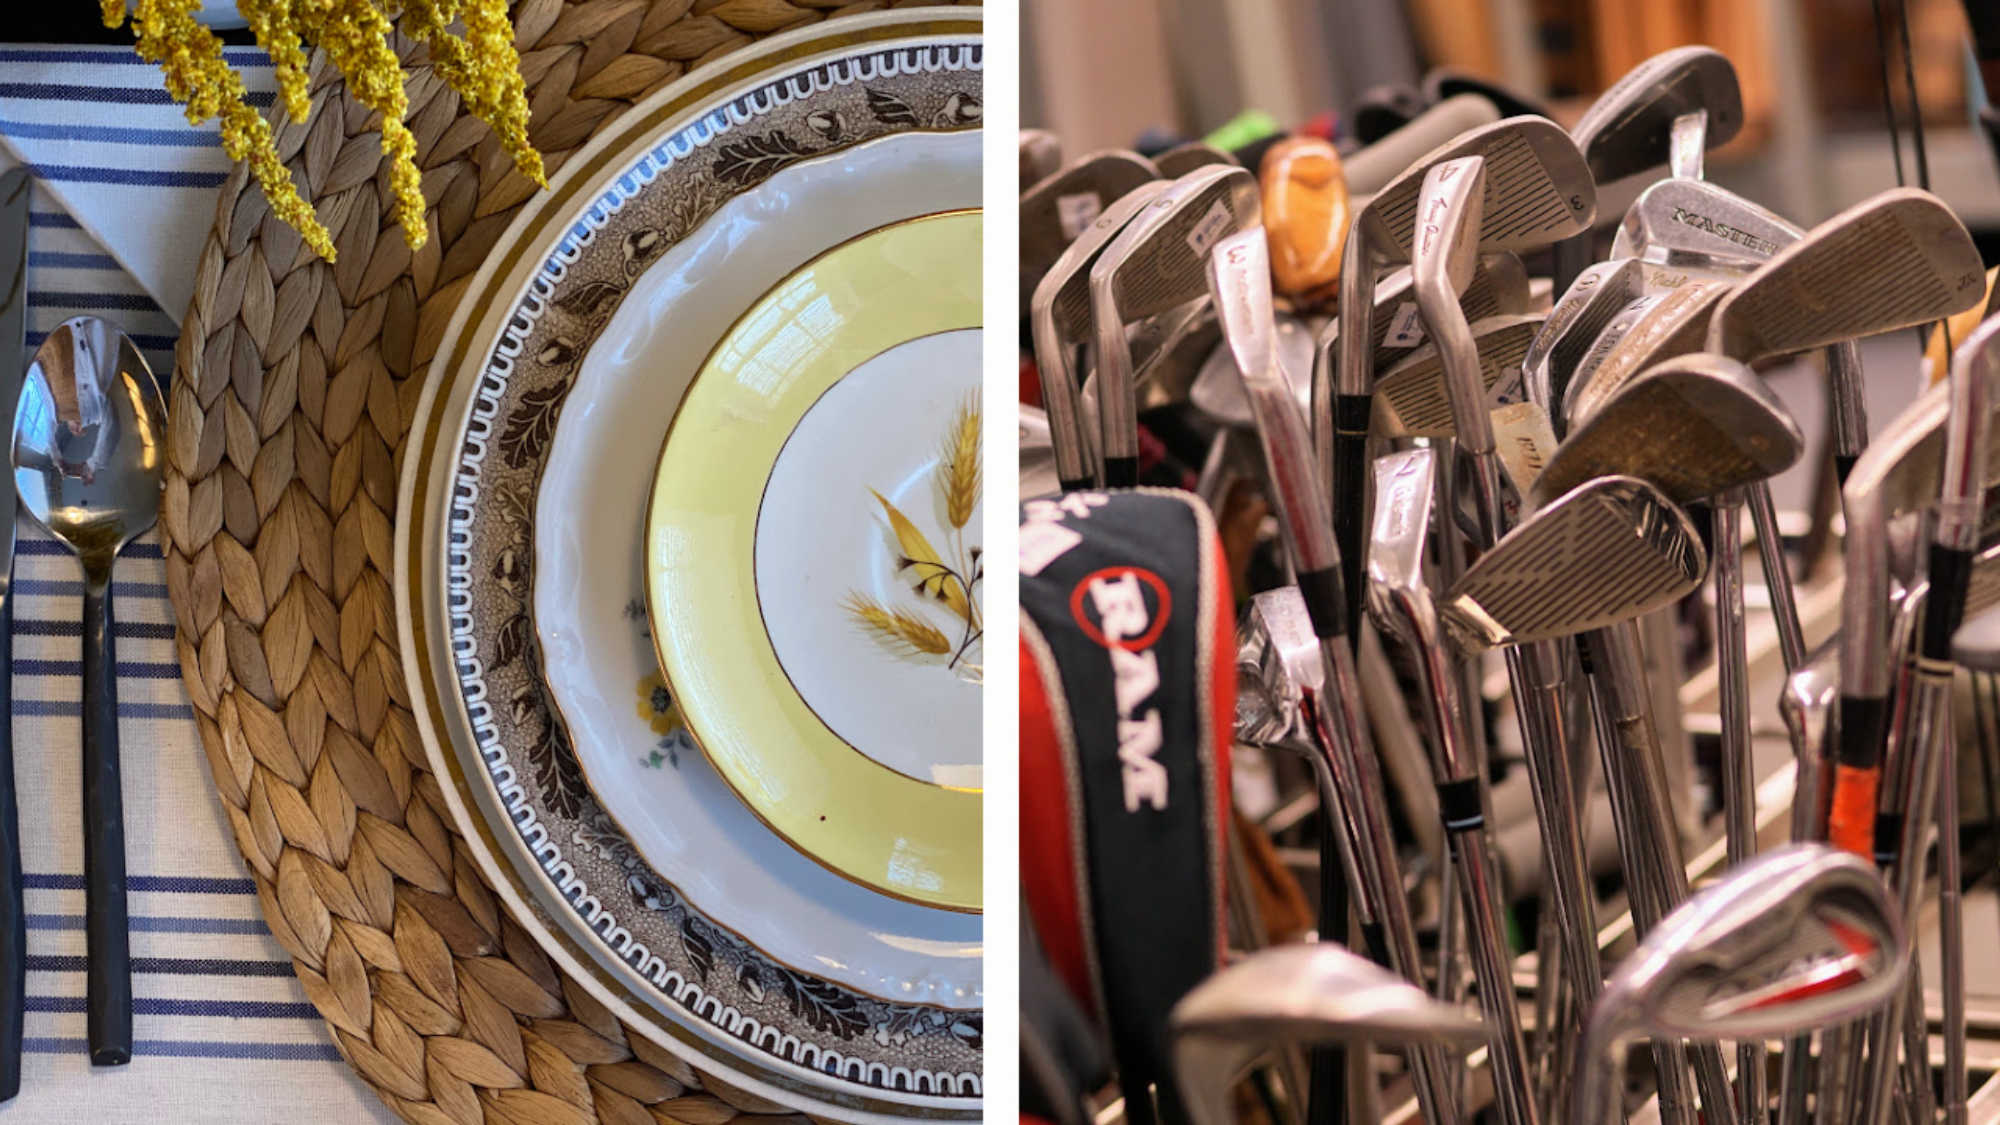 On the left, a place setting featuring thrifted blue and yellow dishware and a woven grass placemat on the right, a set of golf clubs available for purchase at DI.